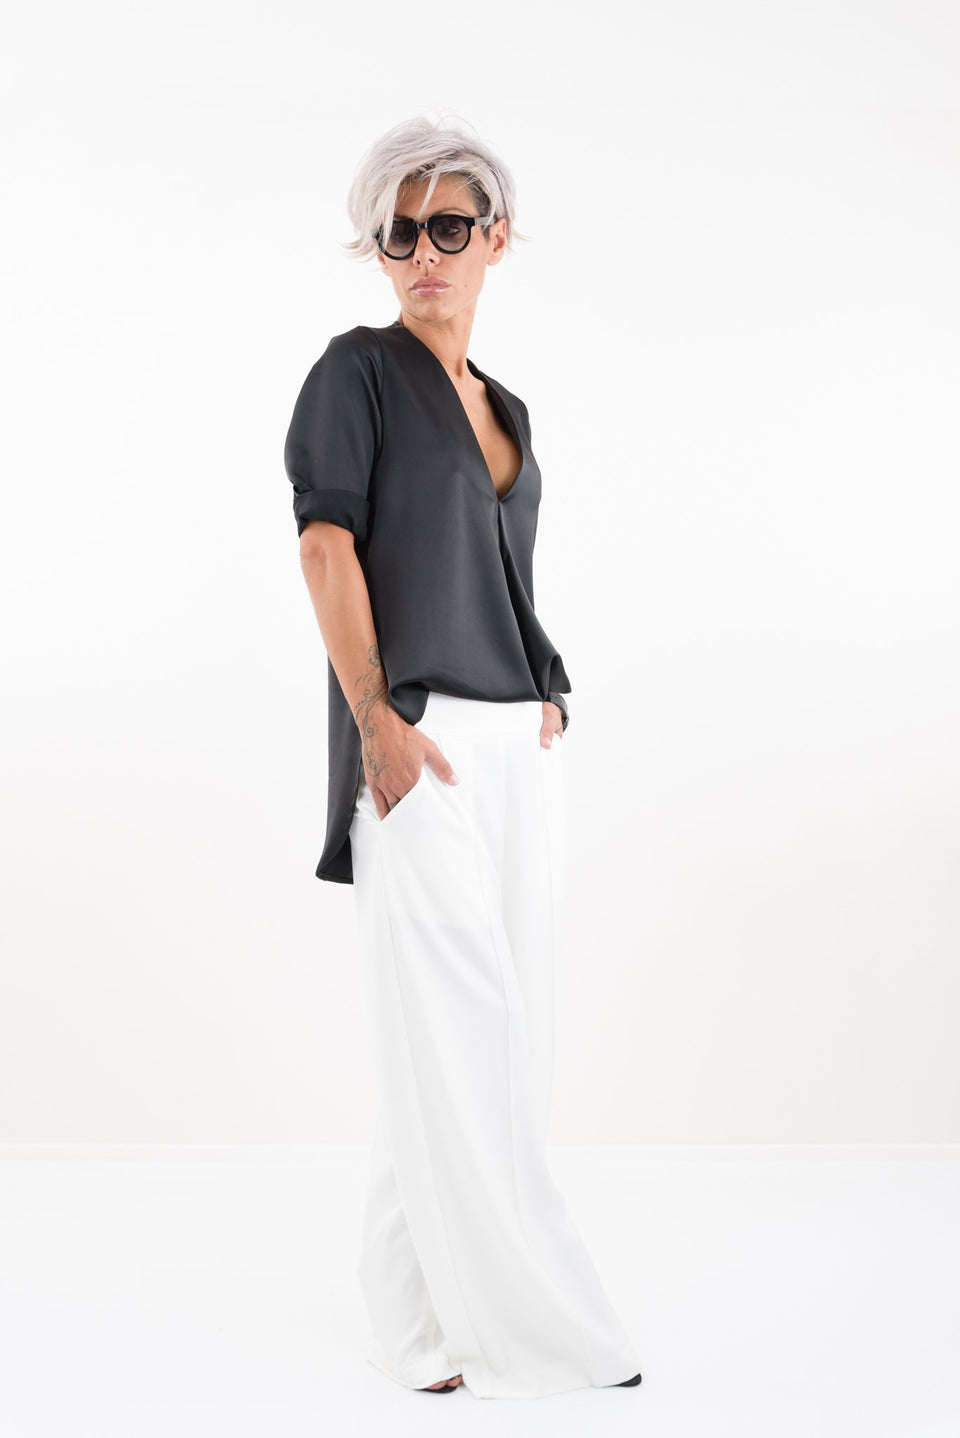 Black Fancy Tunic 7/8 Sleeves and V Neck - Clothes By Locker Room